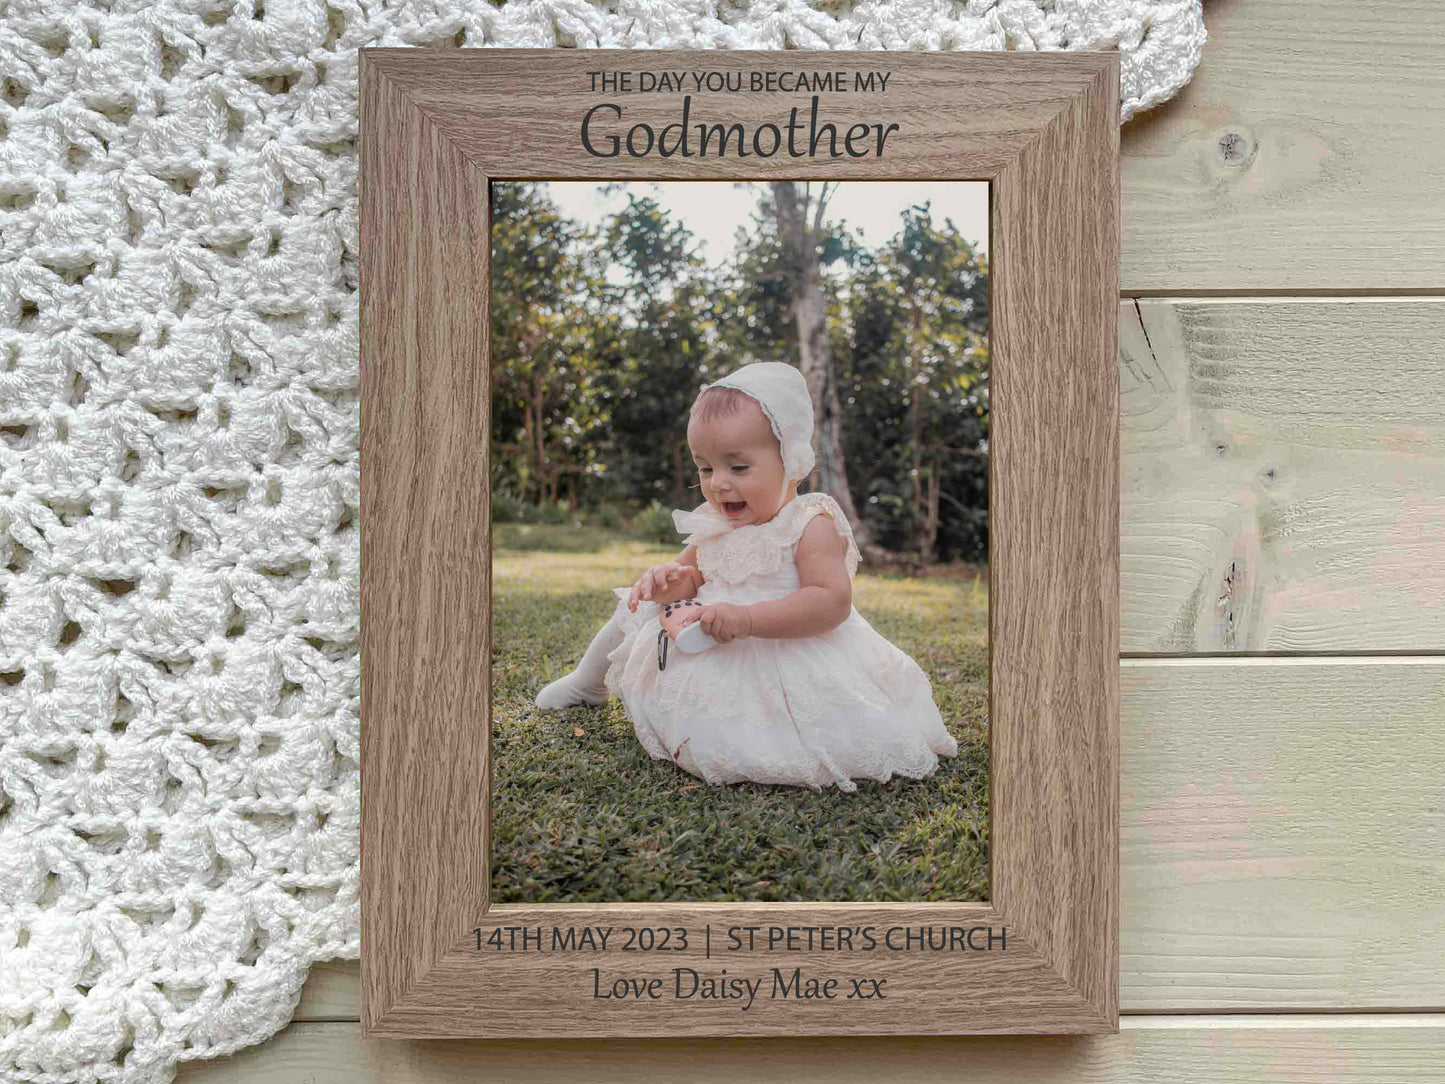 The day you became my Godmother picture frame